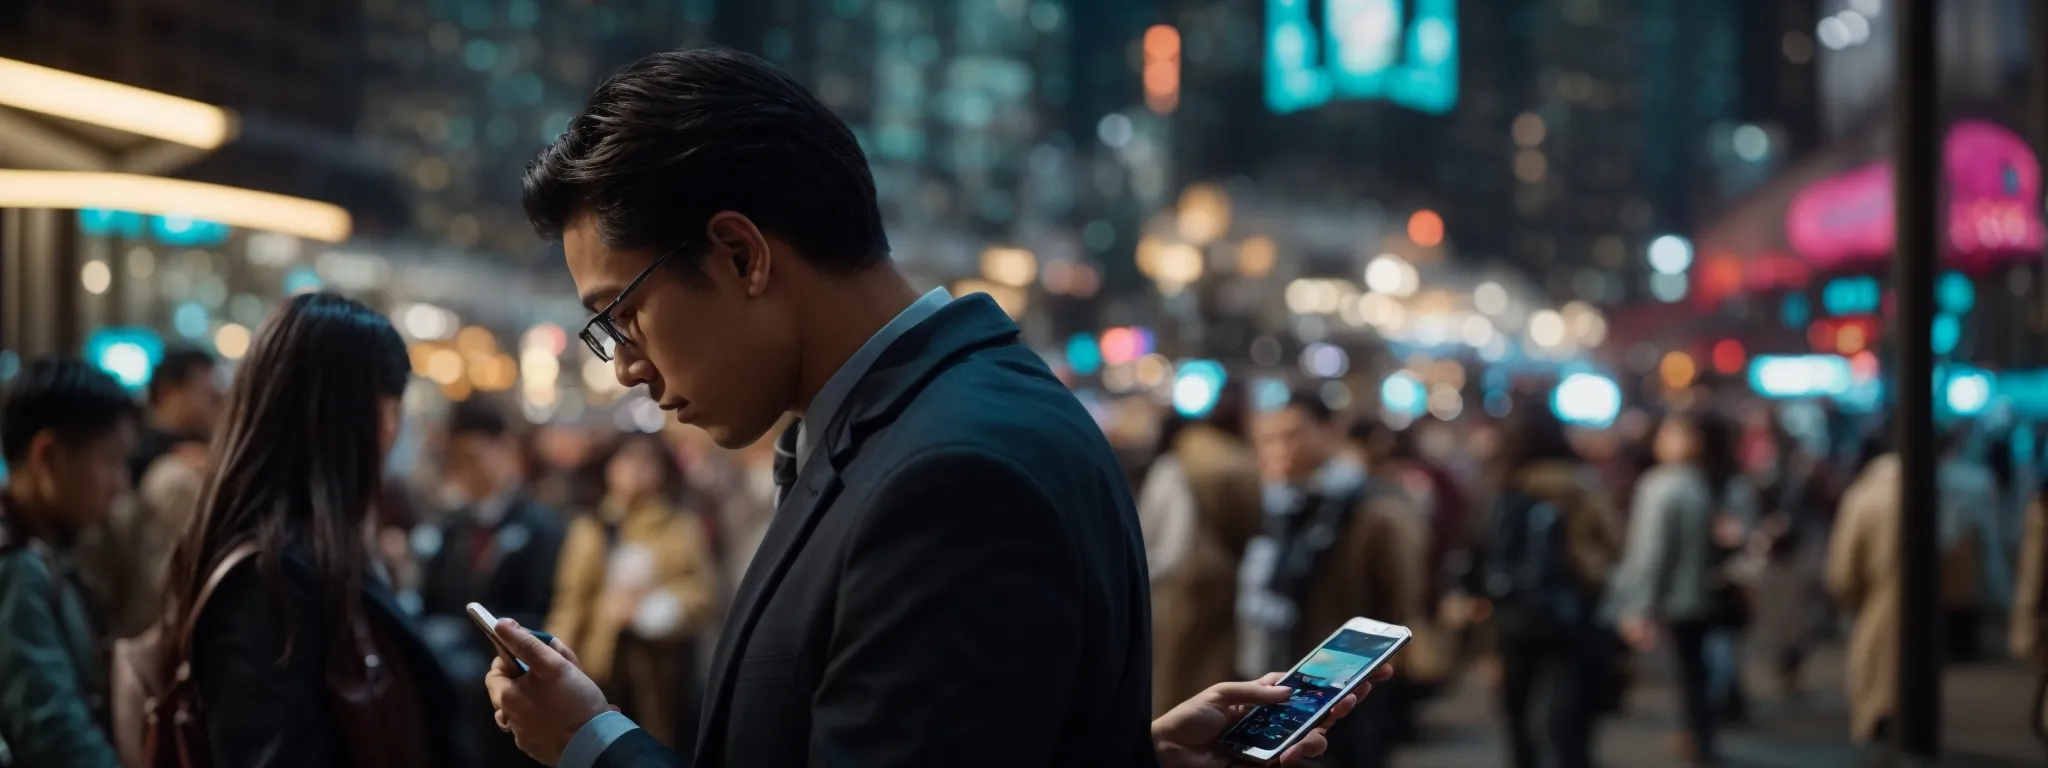 a professional analyzing data on a mobile device in a bustling urban setting.